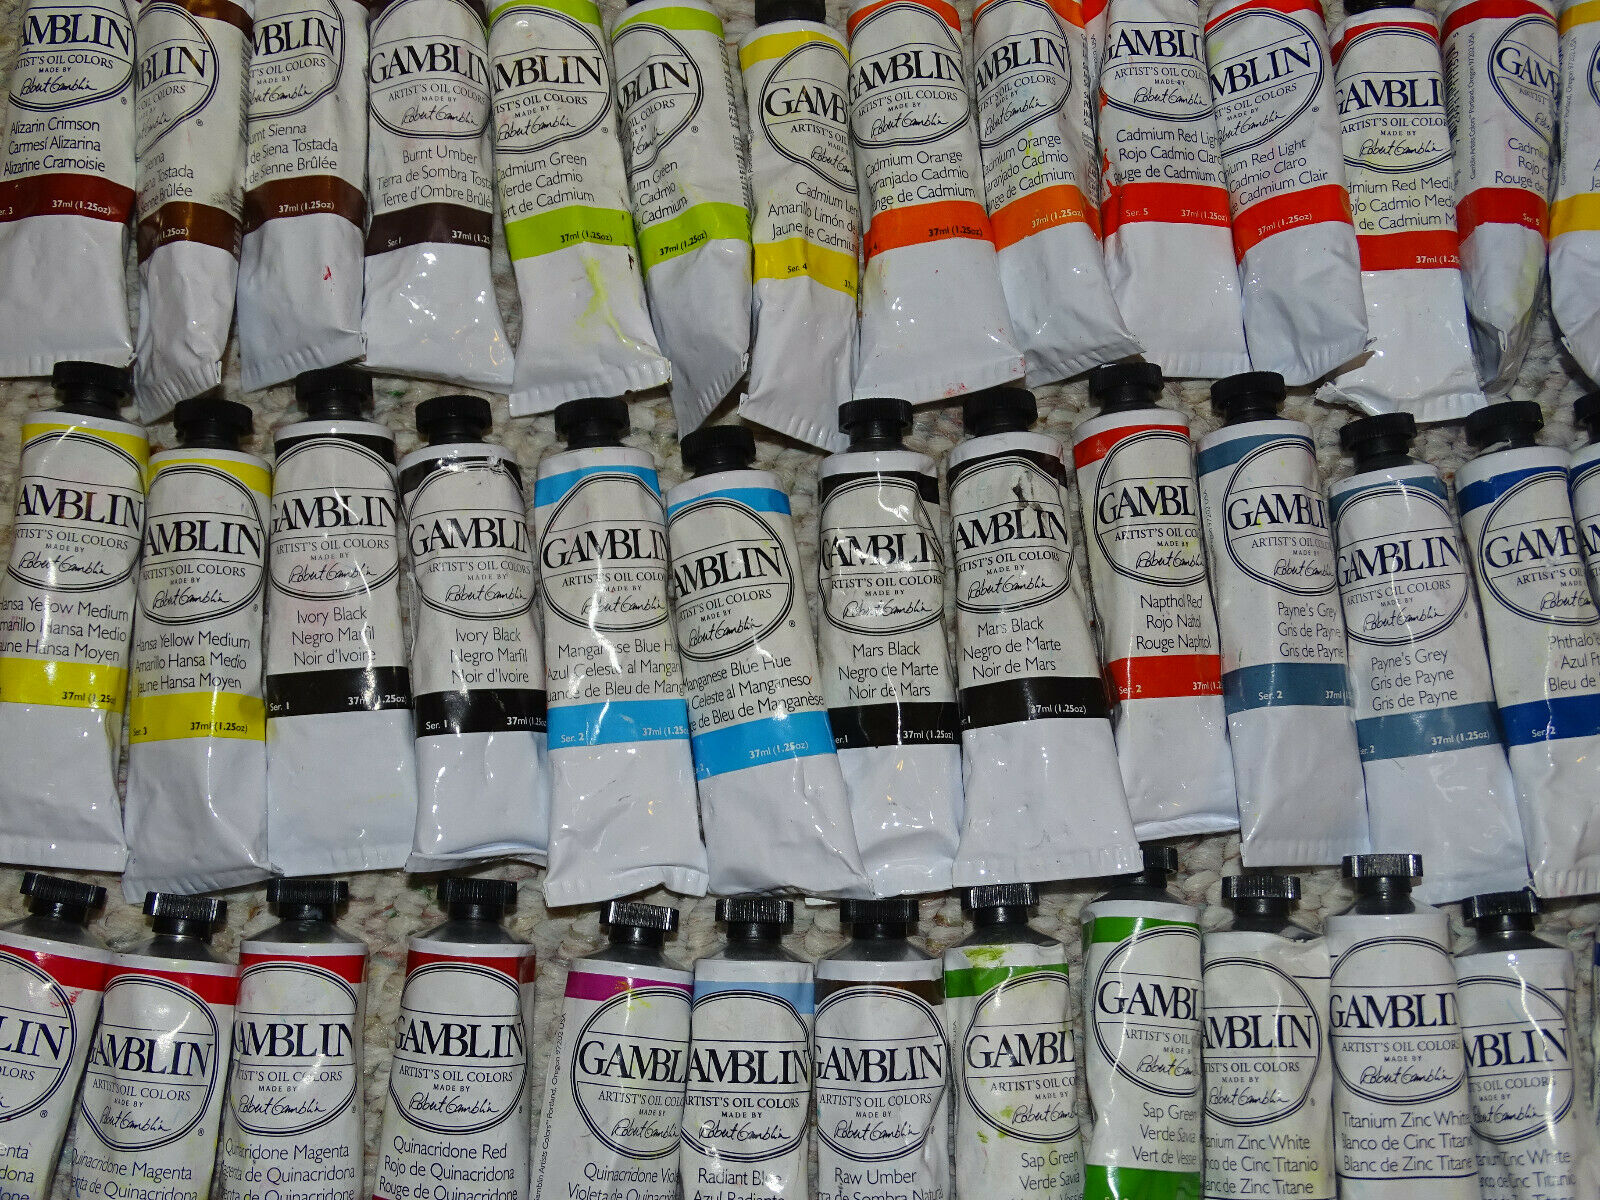 Gamblin Artists' Oil Colors, 37 Ml Tubes, 56 Colors, Flat Rate Shipping, $4.50